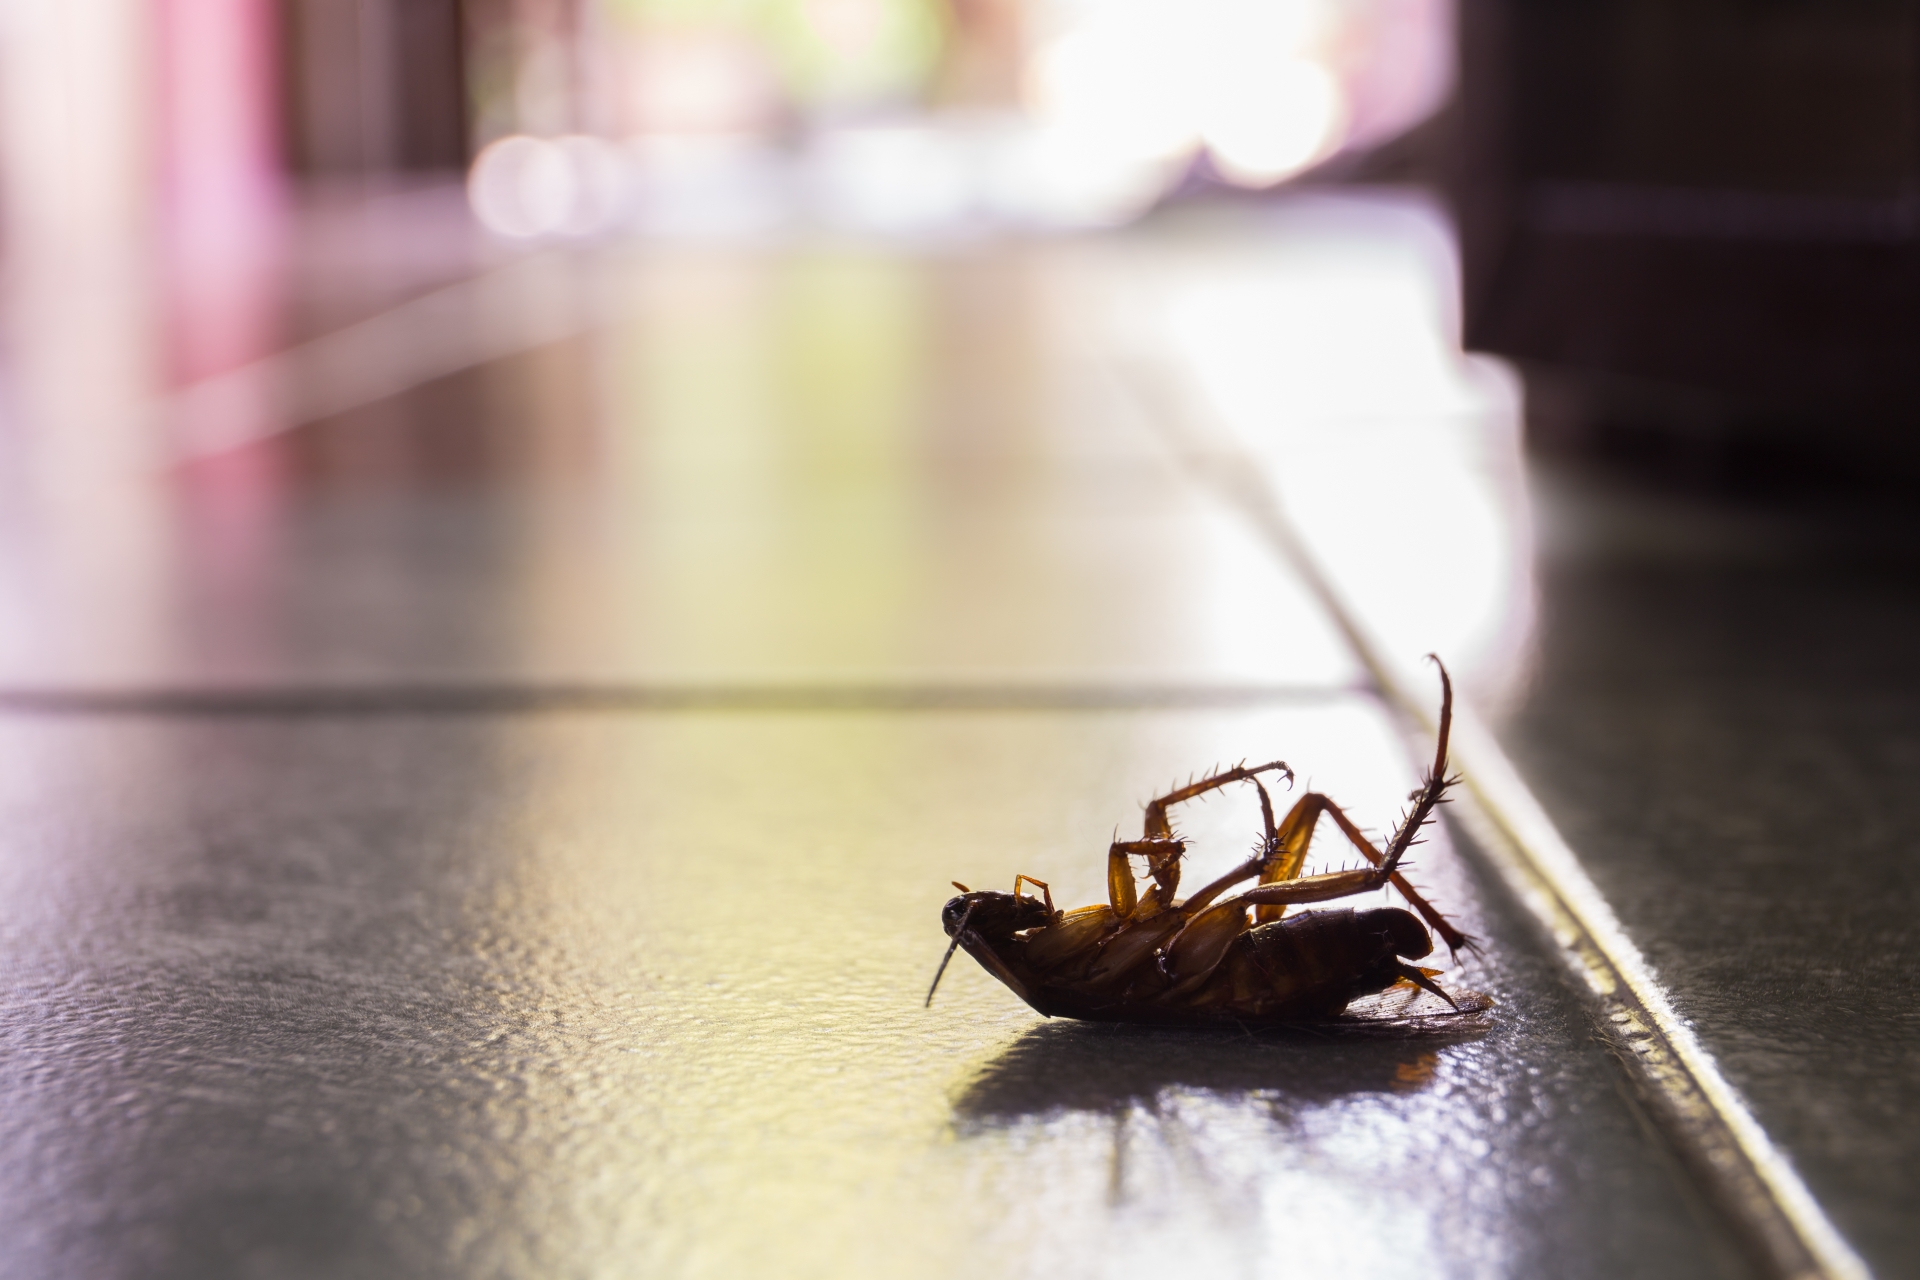 Cockroach Control, Pest Control in Havering-atte-Bower, Abridge, RM4. Call Now 020 8166 9746